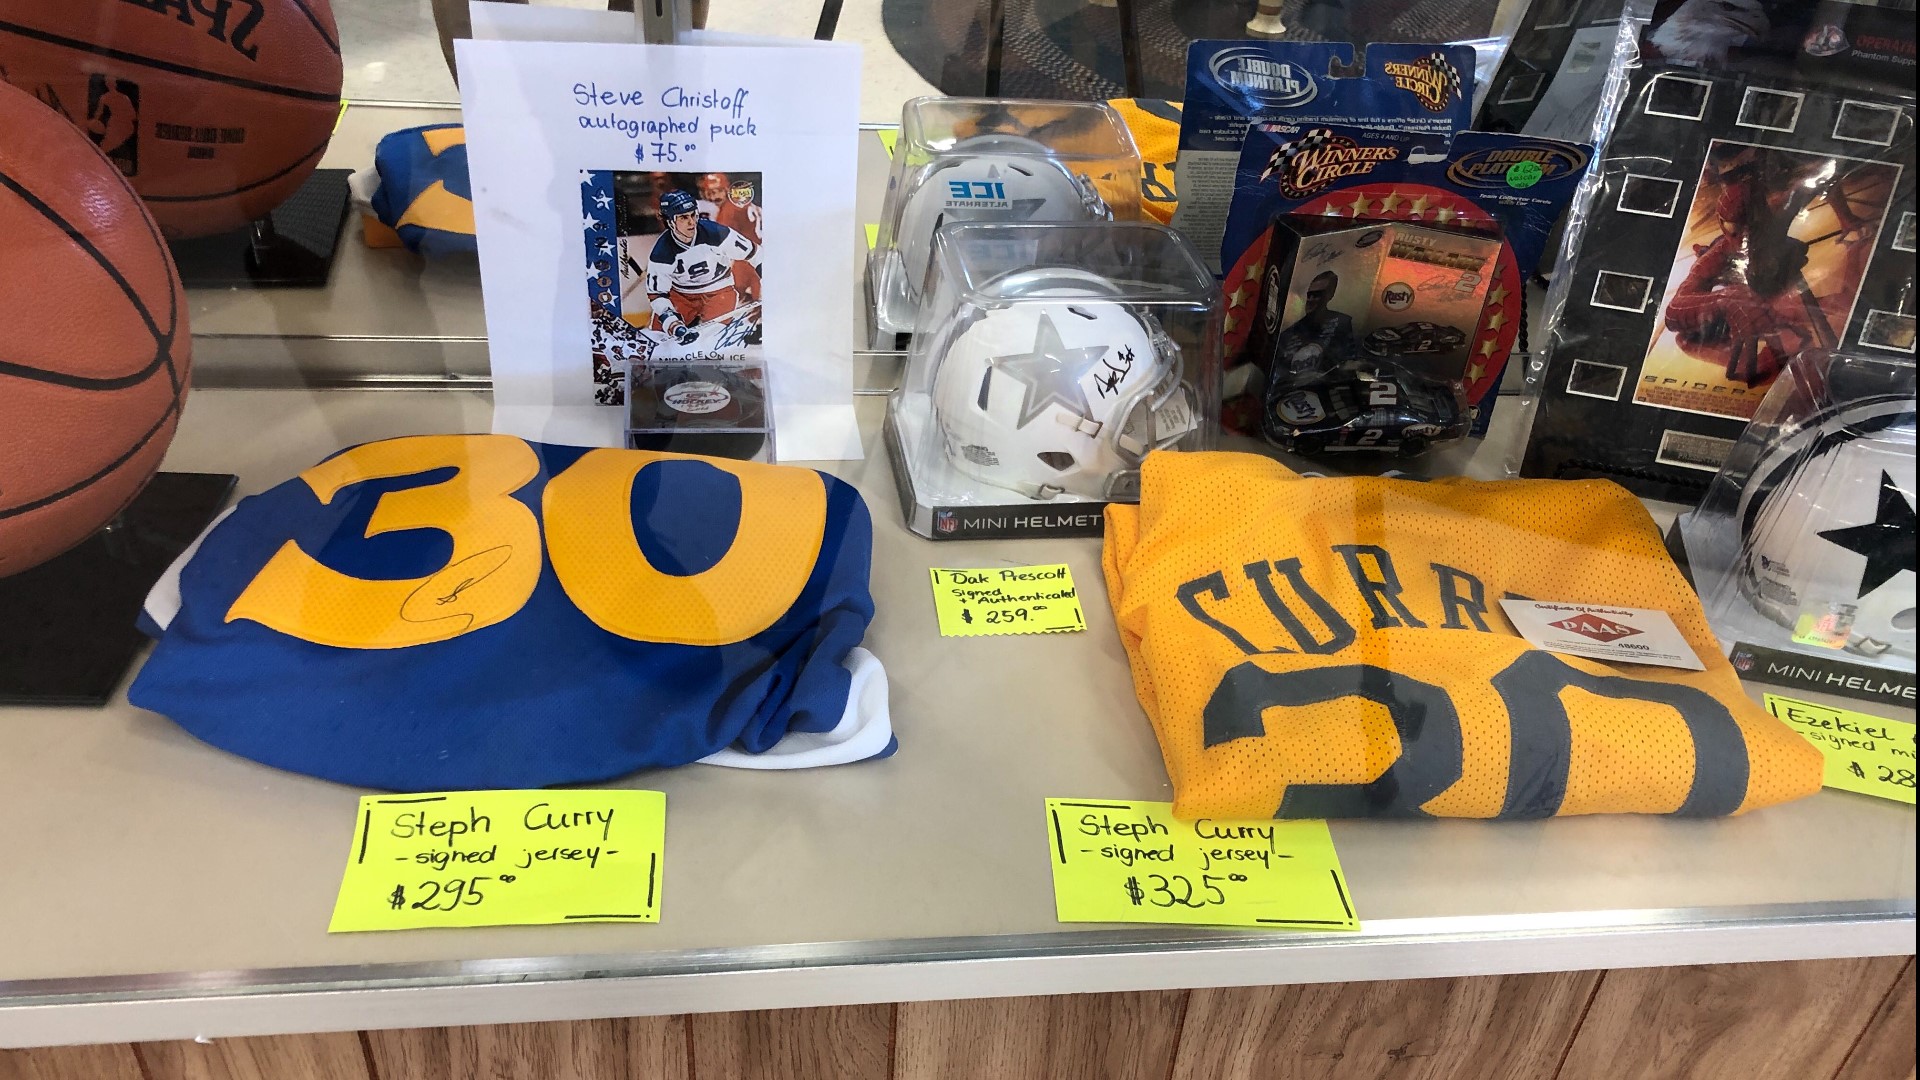 Two signed Steph Curry jerseys were stolen from a display case in the store, but later were given back with an apology note.